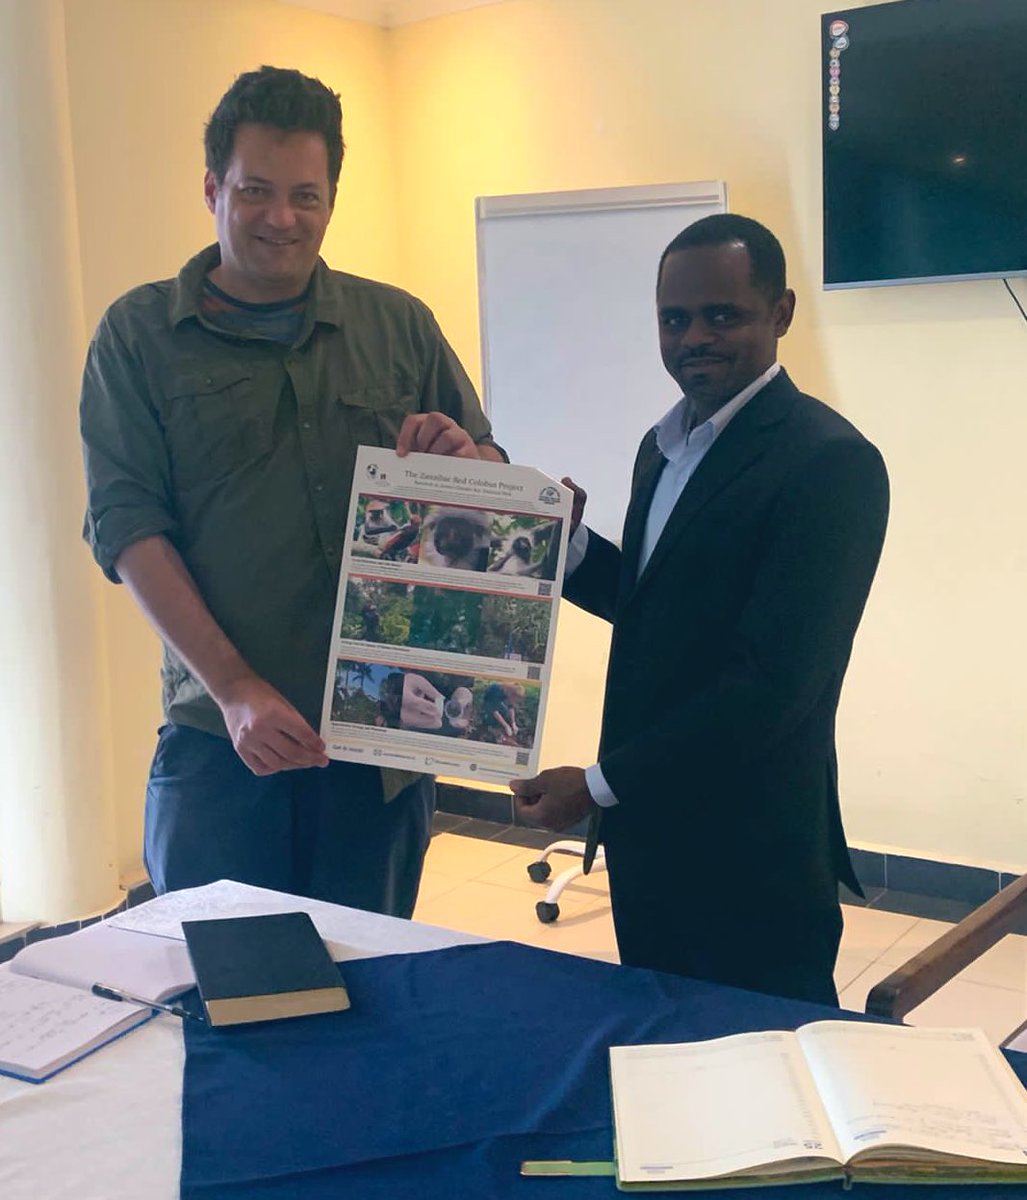 An honour today to meet the Vice Chancellor of State University of Zanzibar @StateSuza Prof. Moh'd Makame Haji and tell him about our work with the @ZanzRedColobus, and about other research and teaching happening at @BangorSNS @BangorUni. Looking forward to working together!